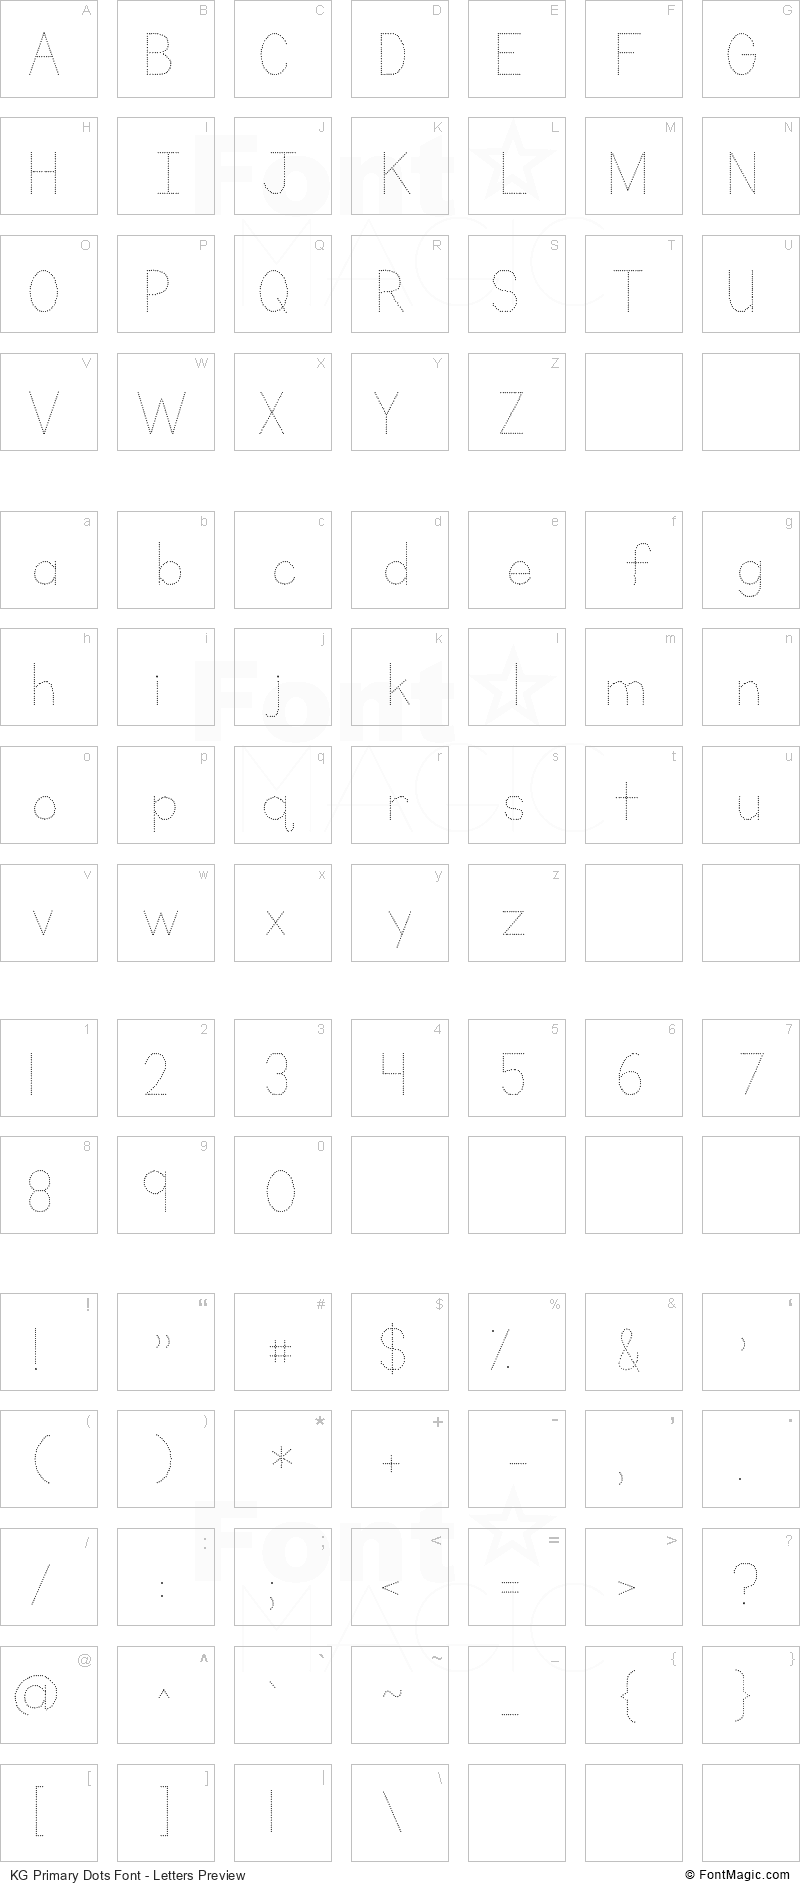 KG Primary Dots Font - All Latters Preview Chart